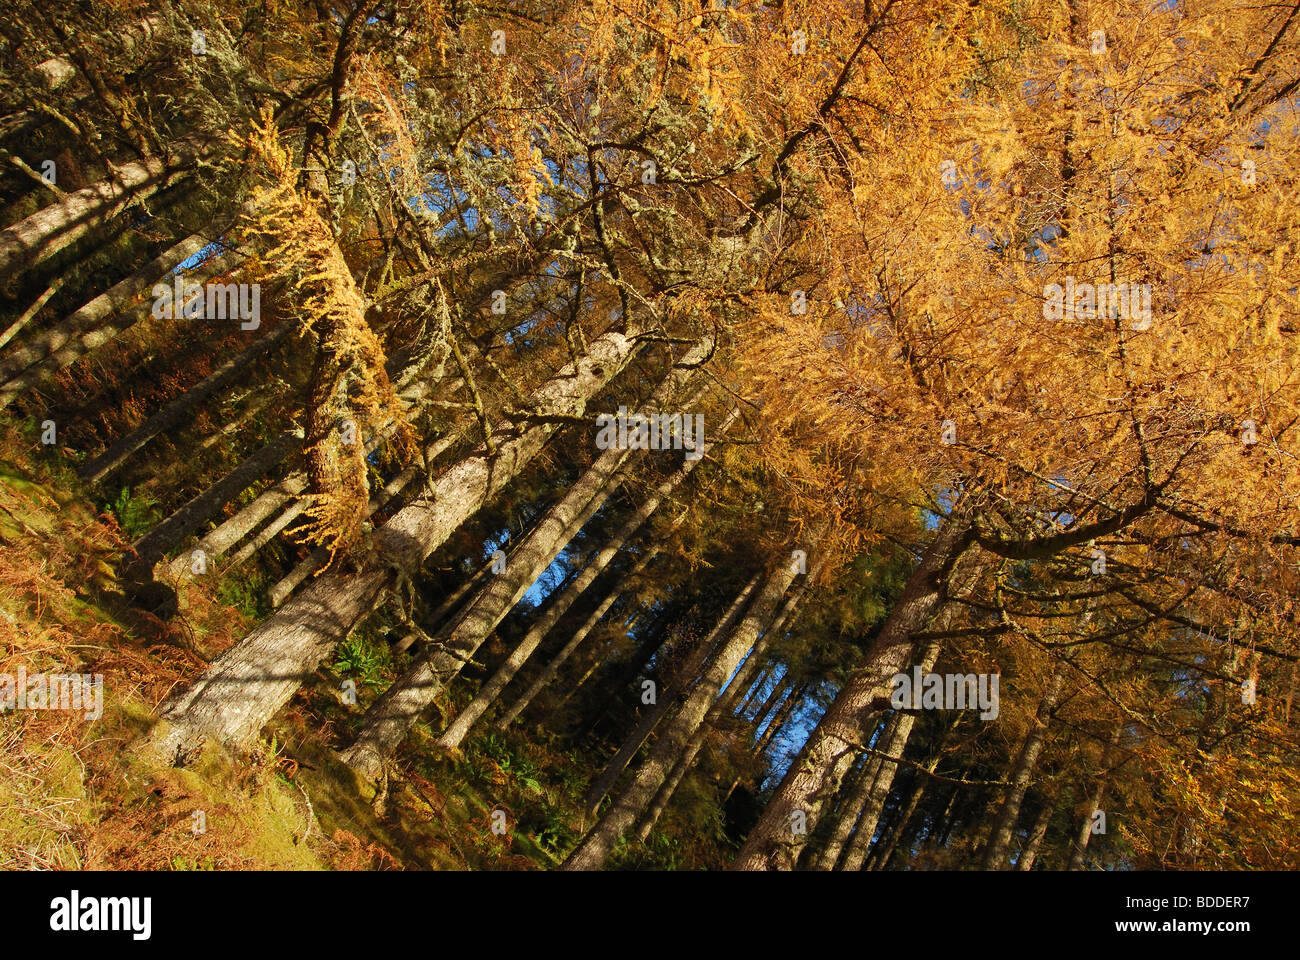 Forest of Larch trees in full Autumn colour, Kilchrenan, Loch Awe, Argyll, Scotland, UK. Stock Photo